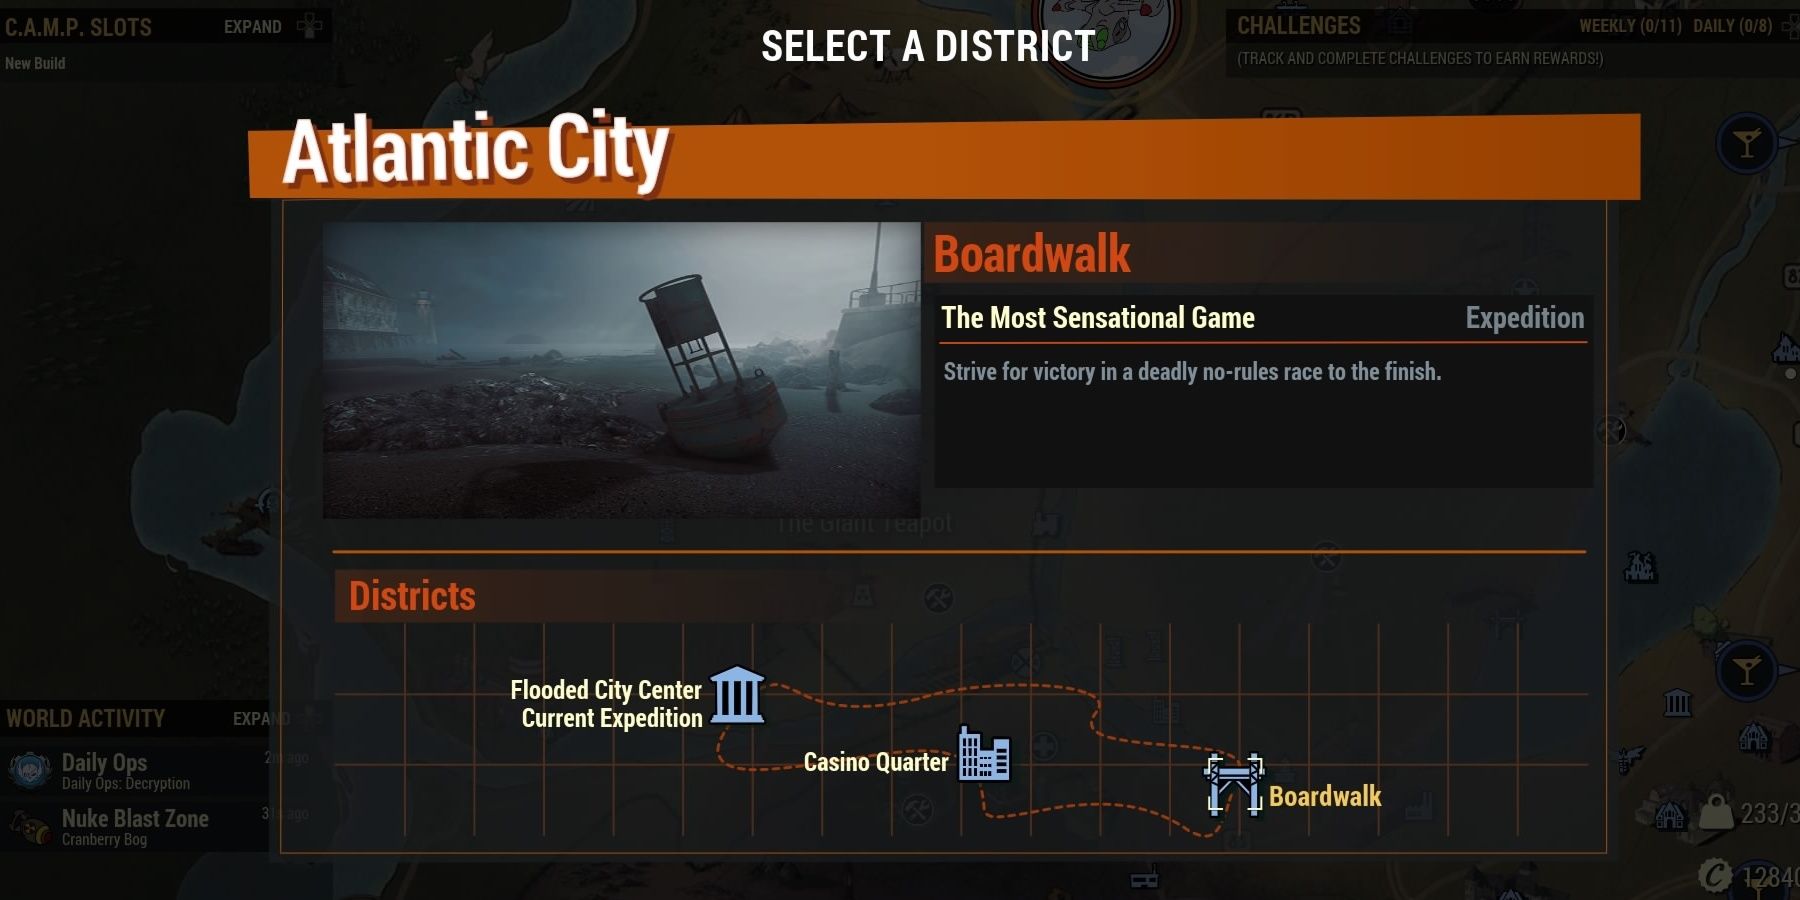 Fallout 76 The Most Sensational Game on the Select A District screen